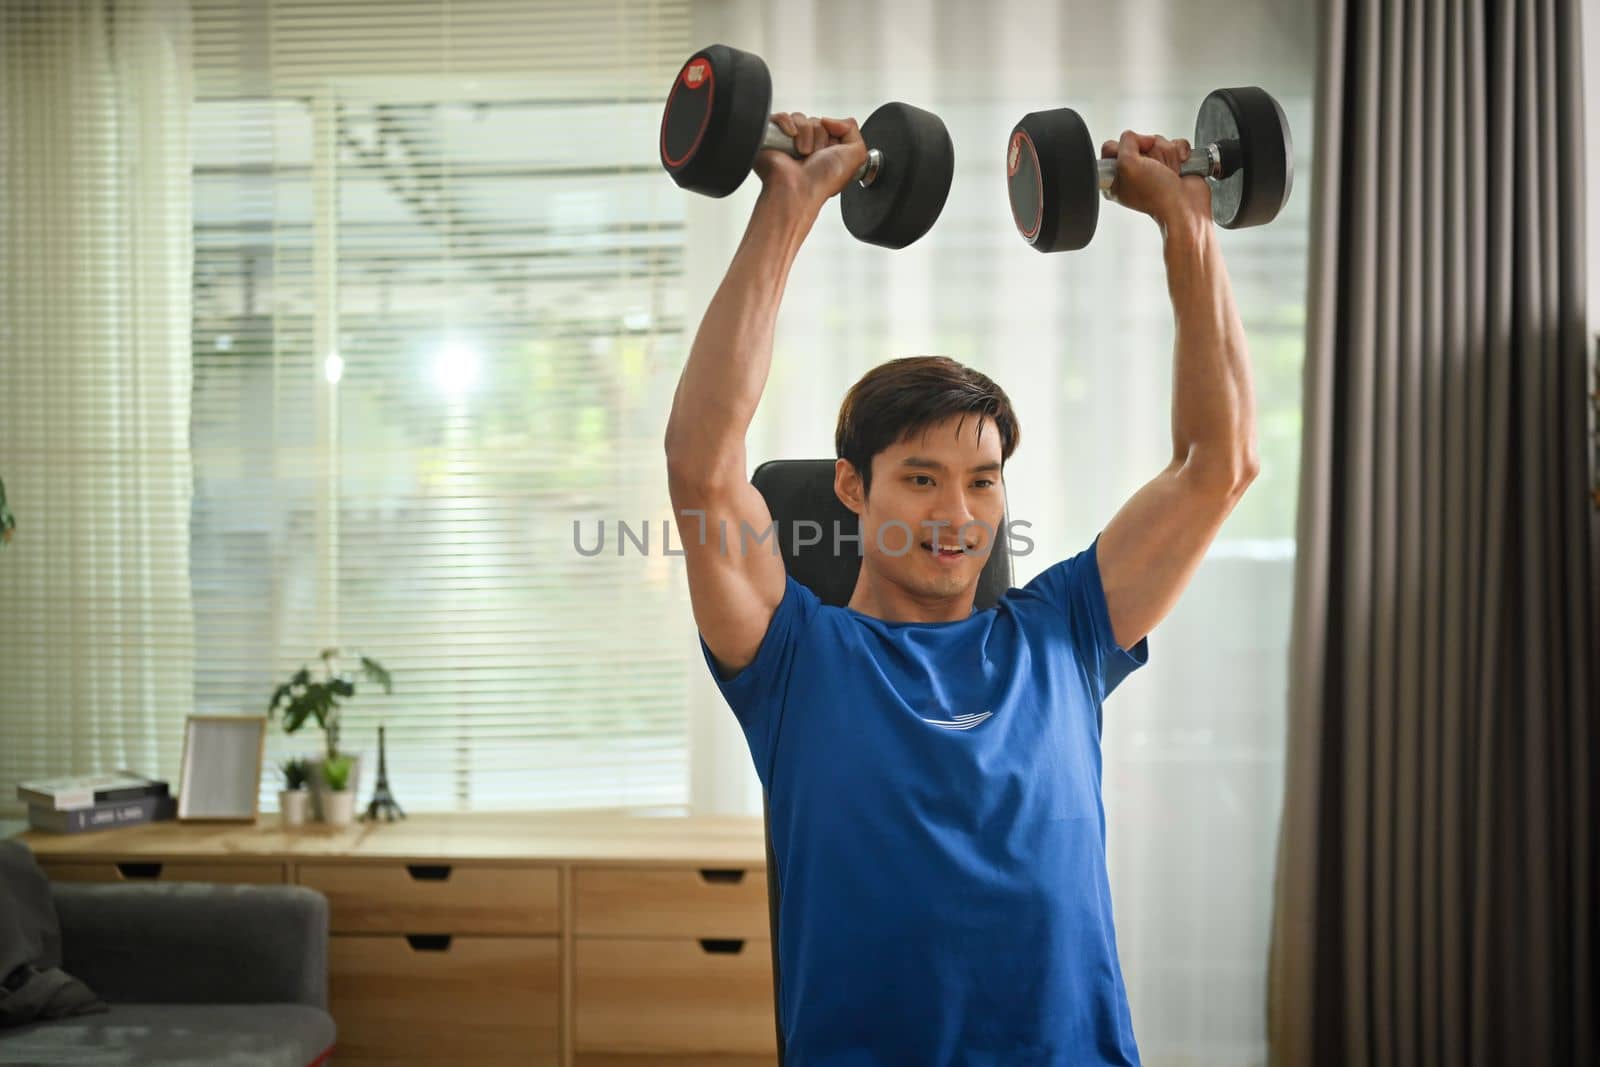 Strong athletic man doing dumbbell workout in bright living room. Fitness, sport and healthy lifestyle concept by prathanchorruangsak